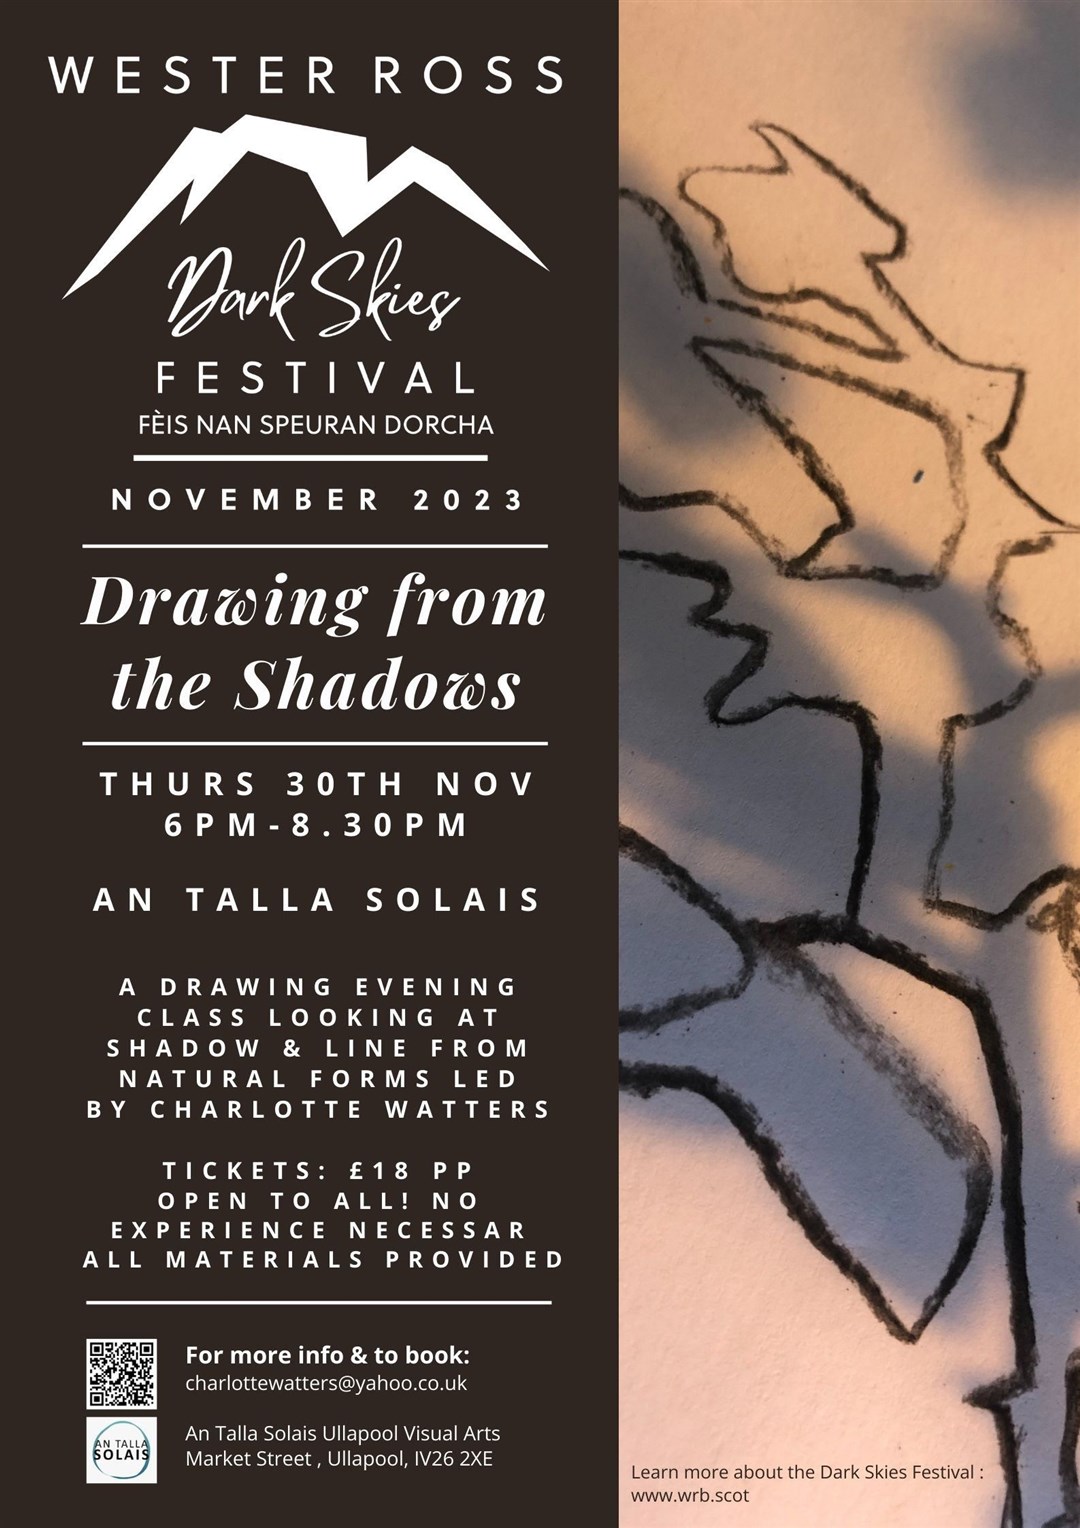 An Talla Solais Dark Skies Festival, Drawing from the Shadows class by Charlotte Watters.